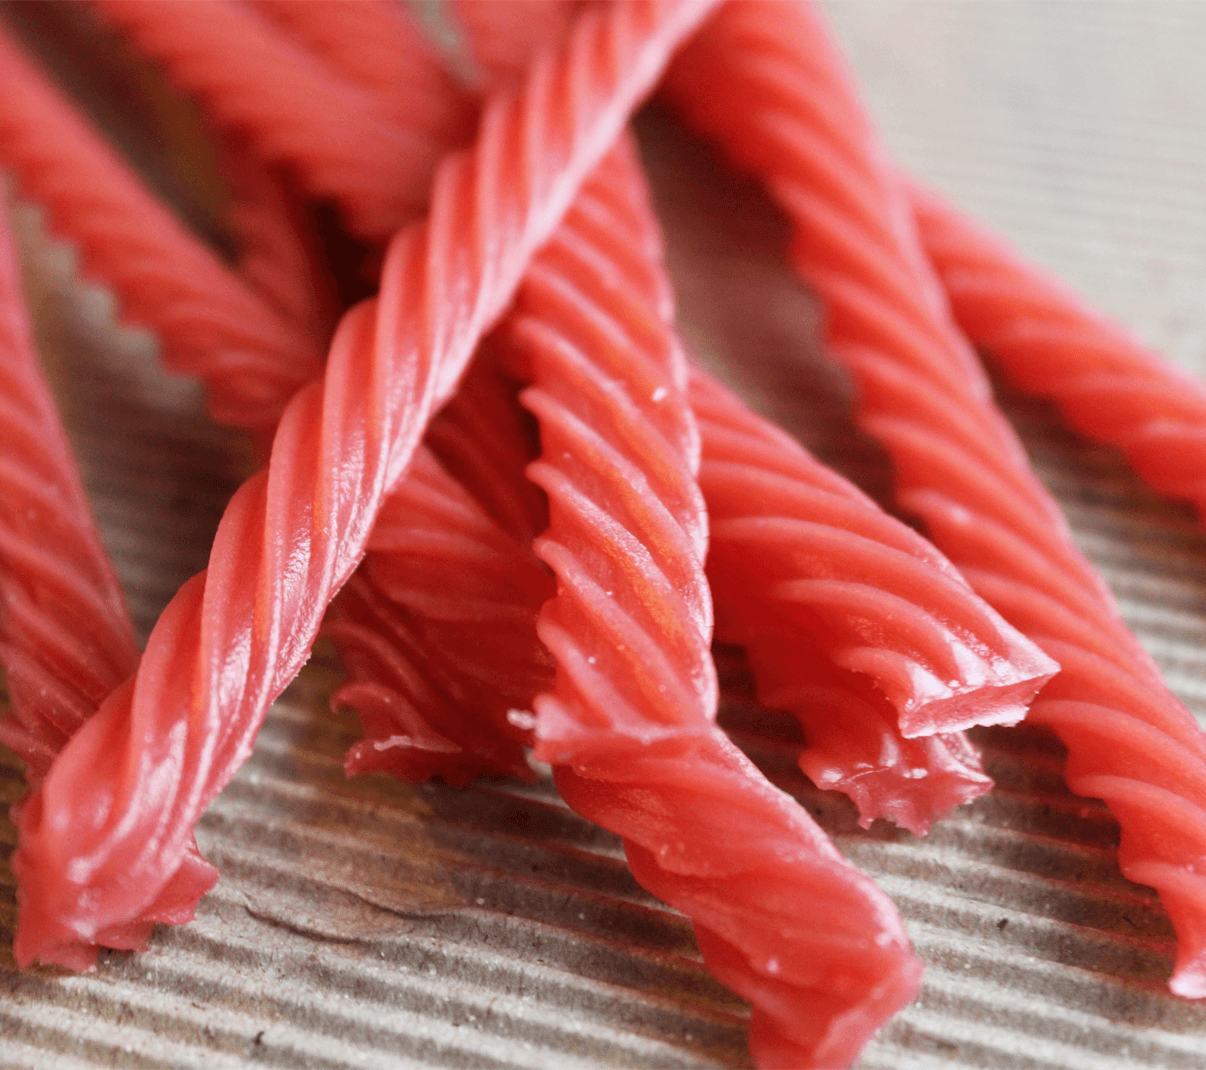 Red Vines Made Simple Berry Licorice Twists 4oz Trays